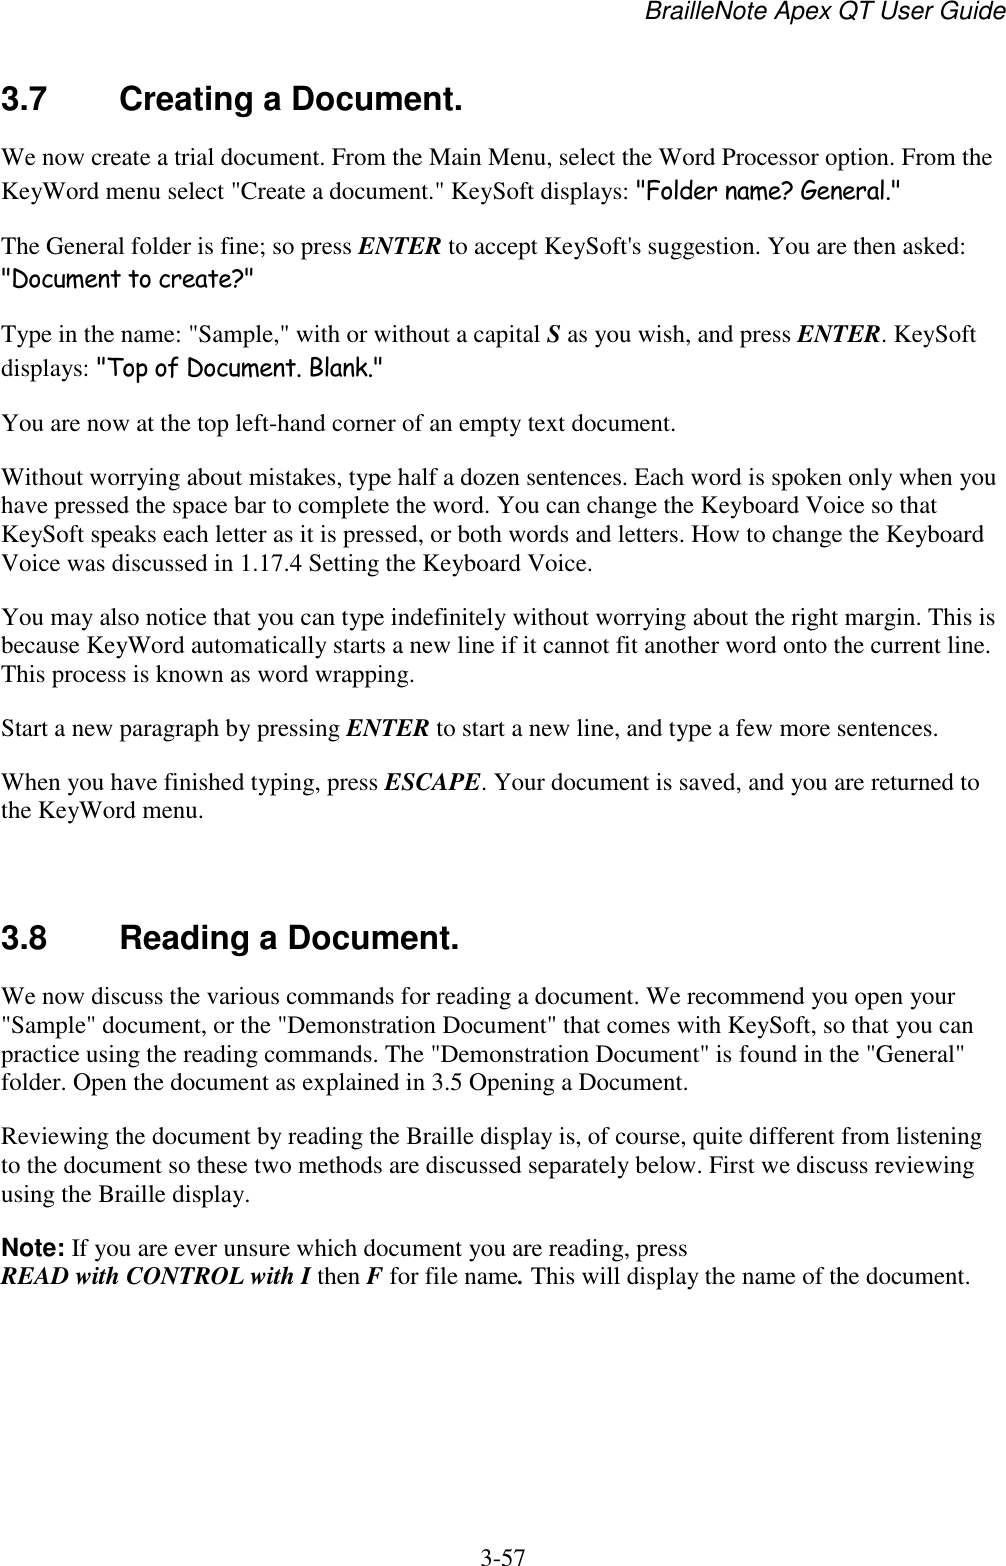 BrailleNote Apex QT User Guide  3-57   3.7  Creating a Document. We now create a trial document. From the Main Menu, select the Word Processor option. From the KeyWord menu select &quot;Create a document.&quot; KeySoft displays: &quot;Folder name? General.&quot; The General folder is fine; so press ENTER to accept KeySoft&apos;s suggestion. You are then asked: &quot;Document to create?&quot; Type in the name: &quot;Sample,&quot; with or without a capital S as you wish, and press ENTER. KeySoft displays: &quot;Top of Document. Blank.&quot; You are now at the top left-hand corner of an empty text document. Without worrying about mistakes, type half a dozen sentences. Each word is spoken only when you have pressed the space bar to complete the word. You can change the Keyboard Voice so that KeySoft speaks each letter as it is pressed, or both words and letters. How to change the Keyboard Voice was discussed in 1.17.4 Setting the Keyboard Voice. You may also notice that you can type indefinitely without worrying about the right margin. This is because KeyWord automatically starts a new line if it cannot fit another word onto the current line. This process is known as word wrapping. Start a new paragraph by pressing ENTER to start a new line, and type a few more sentences. When you have finished typing, press ESCAPE. Your document is saved, and you are returned to the KeyWord menu.   3.8  Reading a Document. We now discuss the various commands for reading a document. We recommend you open your &quot;Sample&quot; document, or the &quot;Demonstration Document&quot; that comes with KeySoft, so that you can practice using the reading commands. The &quot;Demonstration Document&quot; is found in the &quot;General&quot; folder. Open the document as explained in 3.5 Opening a Document. Reviewing the document by reading the Braille display is, of course, quite different from listening to the document so these two methods are discussed separately below. First we discuss reviewing using the Braille display. Note: If you are ever unsure which document you are reading, press READ with CONTROL with I then F for file name. This will display the name of the document.   